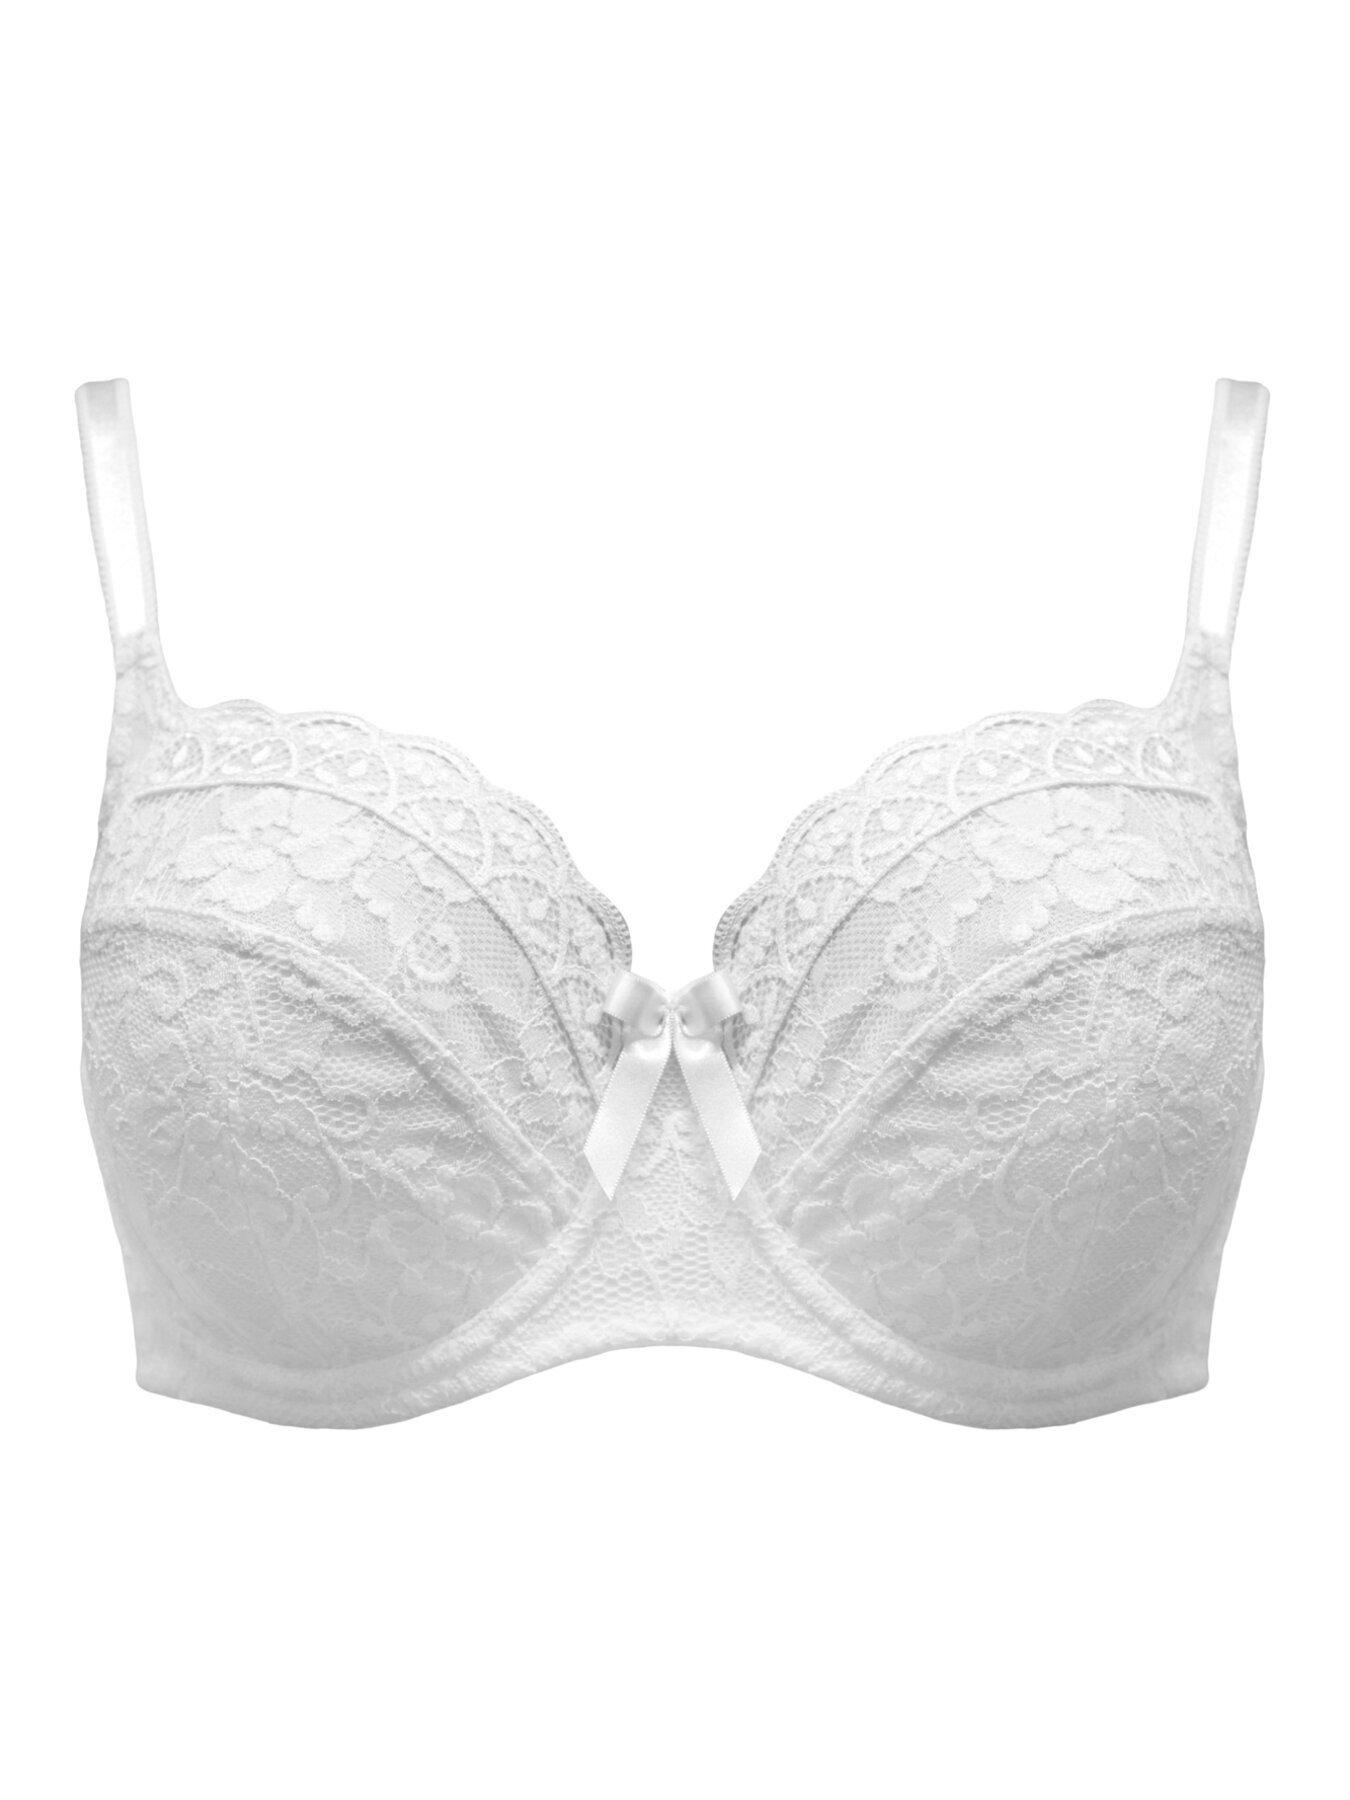 Miss Mary of Sweden MStay Fresh Underwired Moulded Strap Bra - White